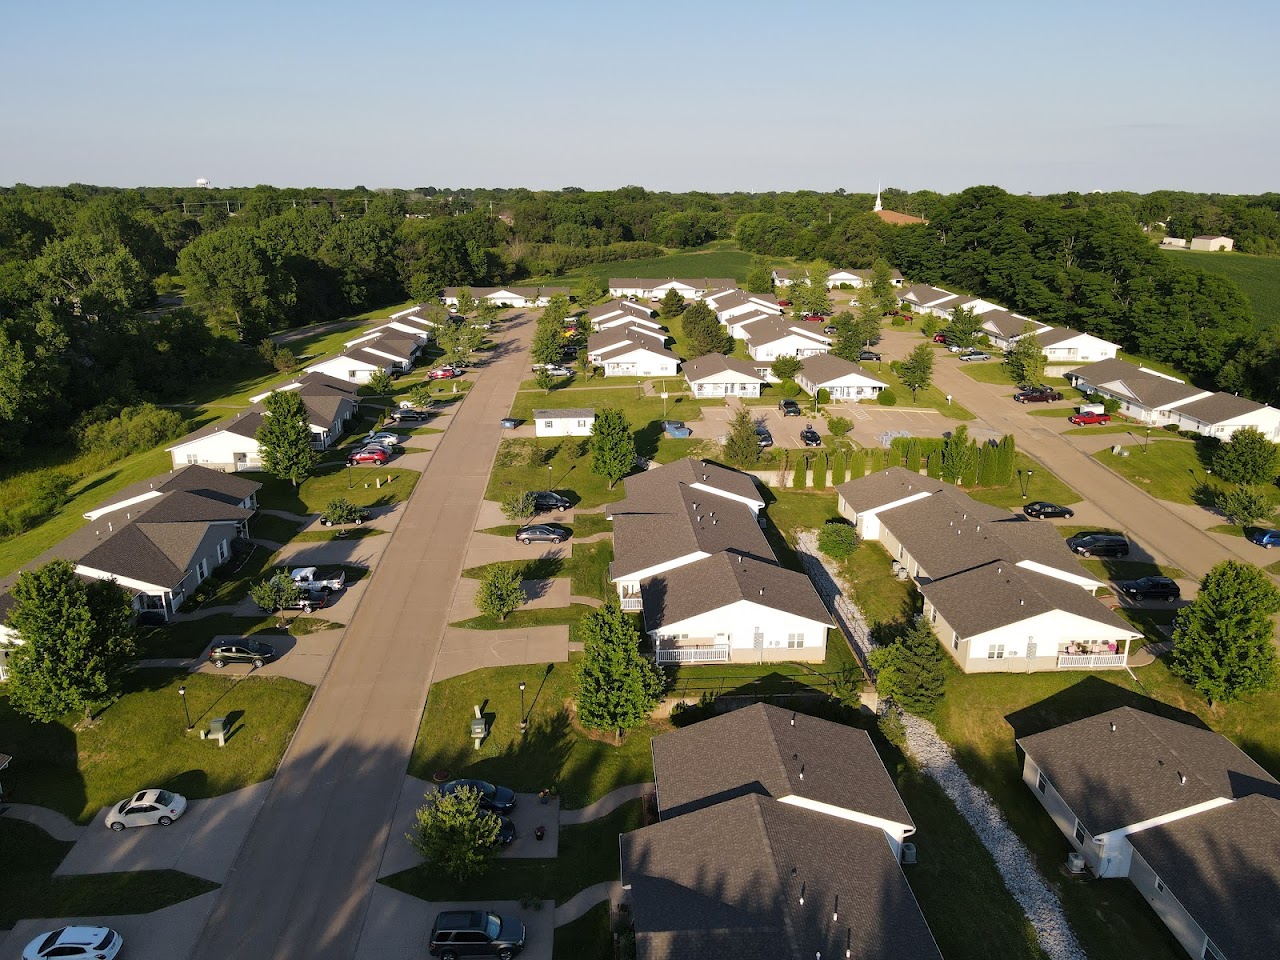 Photo of MEADOW CREST GARDENS. Affordable housing located at 2501 W 53RD ST DAVENPORT, IA 52806